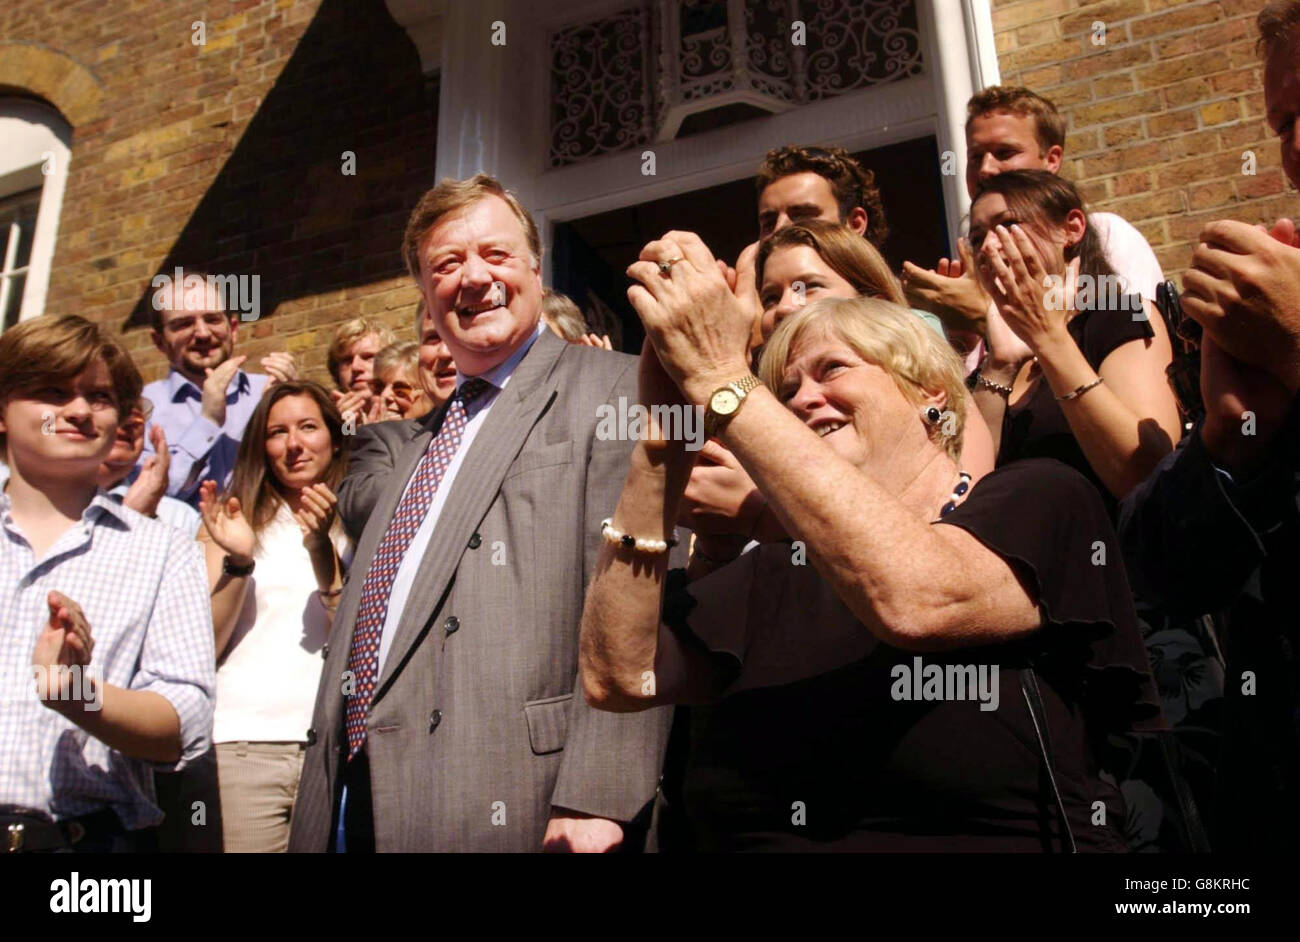 Conservative MP Ken Clarke receives the applause of his supporters as he stands on the steps of the St. Stephens Club, in London, Wednesday August 31, 2005, as the former Chancellor formerly announces his intention to enter the race for the Conservative party leadership contest. See PA Story POLITICS Tories. PRESS ASSOCIATION Photo. Photo credit should read: Chris Young/PA Stock Photo